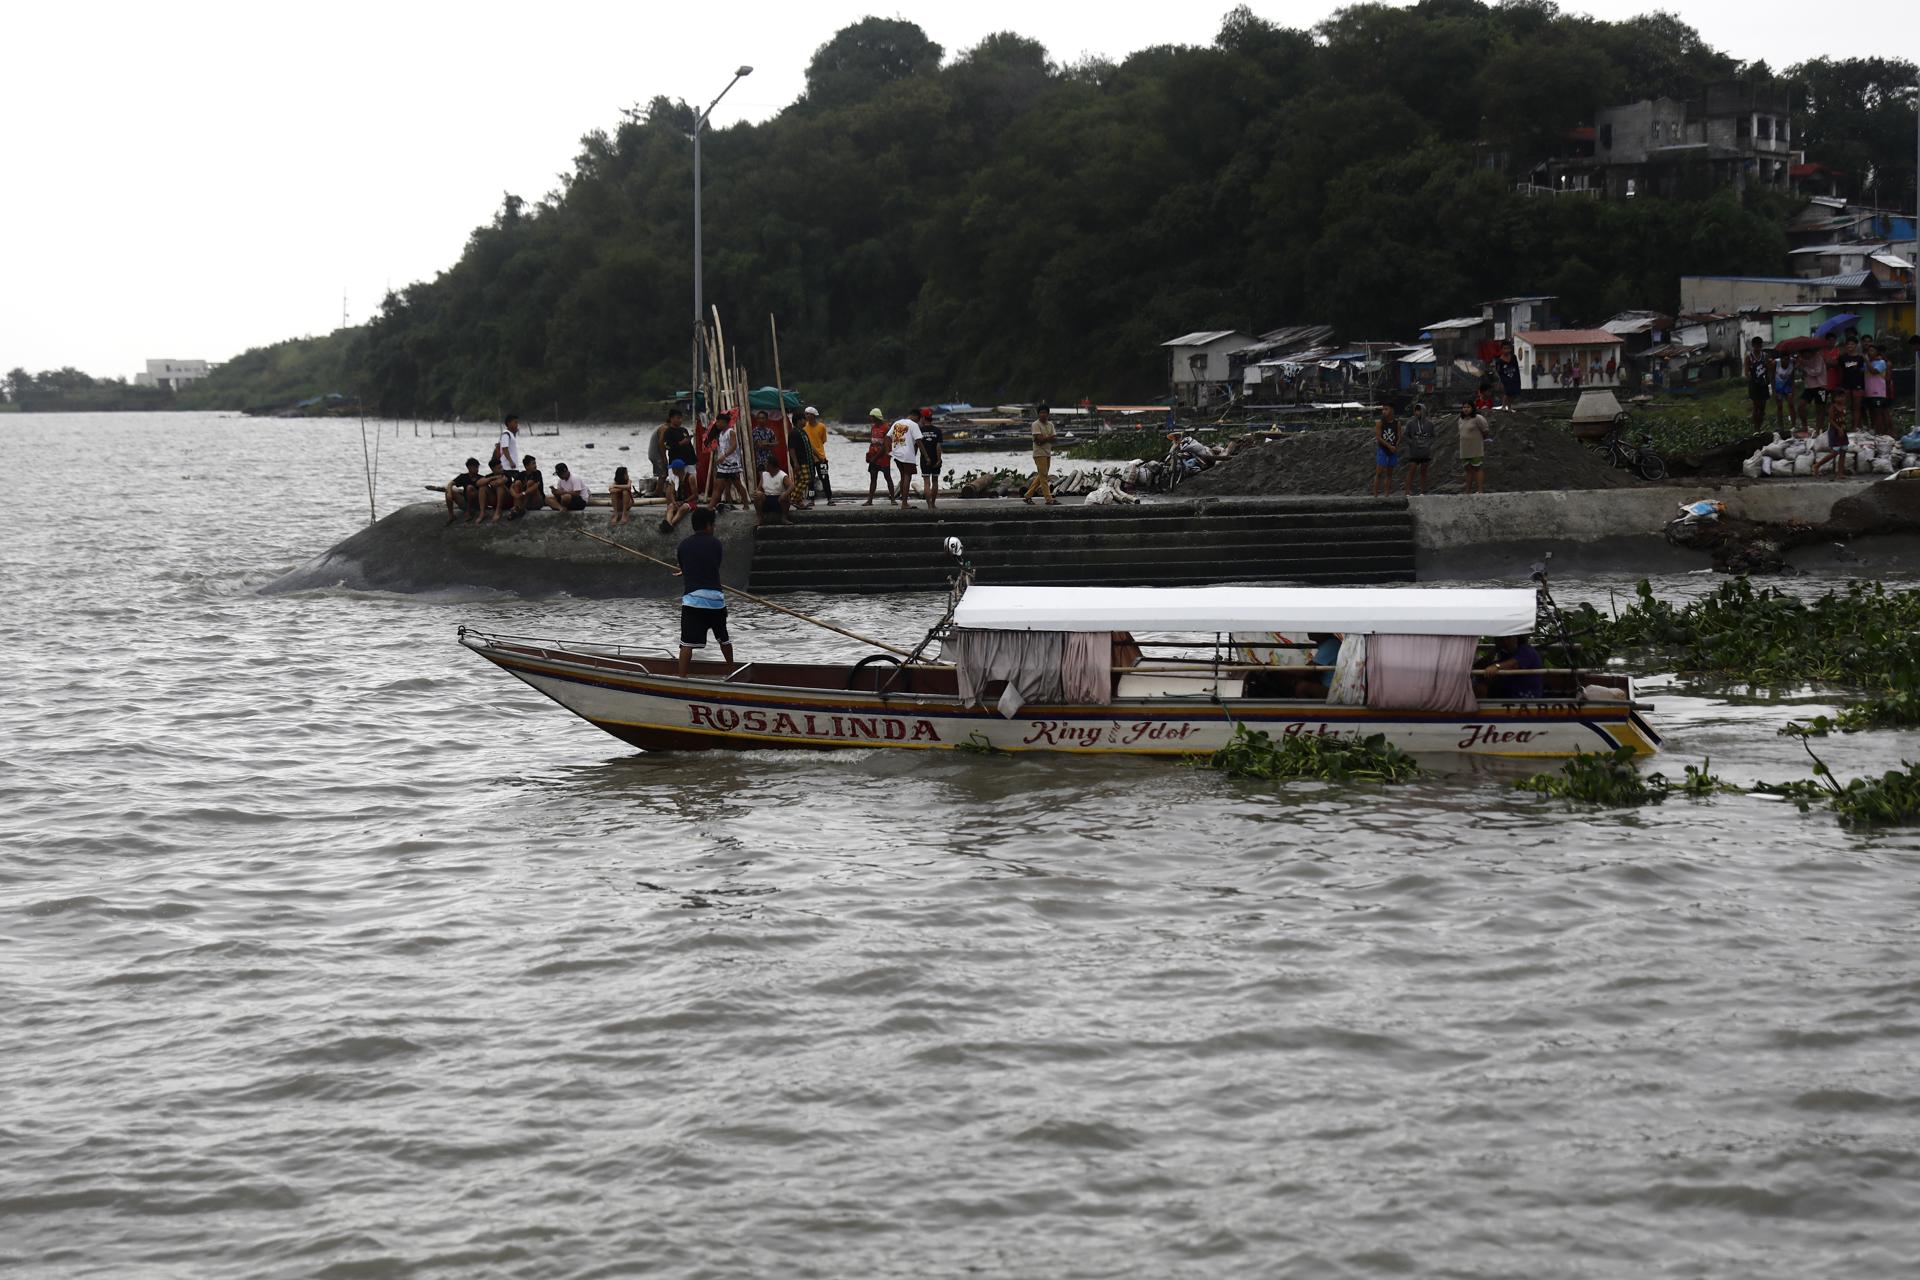 Villagers wait along a pier for news after a passenger boat capsized, at the Binangonan port, Rizal province, Philippines, 27 July 2023. EFE-EPA/FRANCIS R. MALASIG